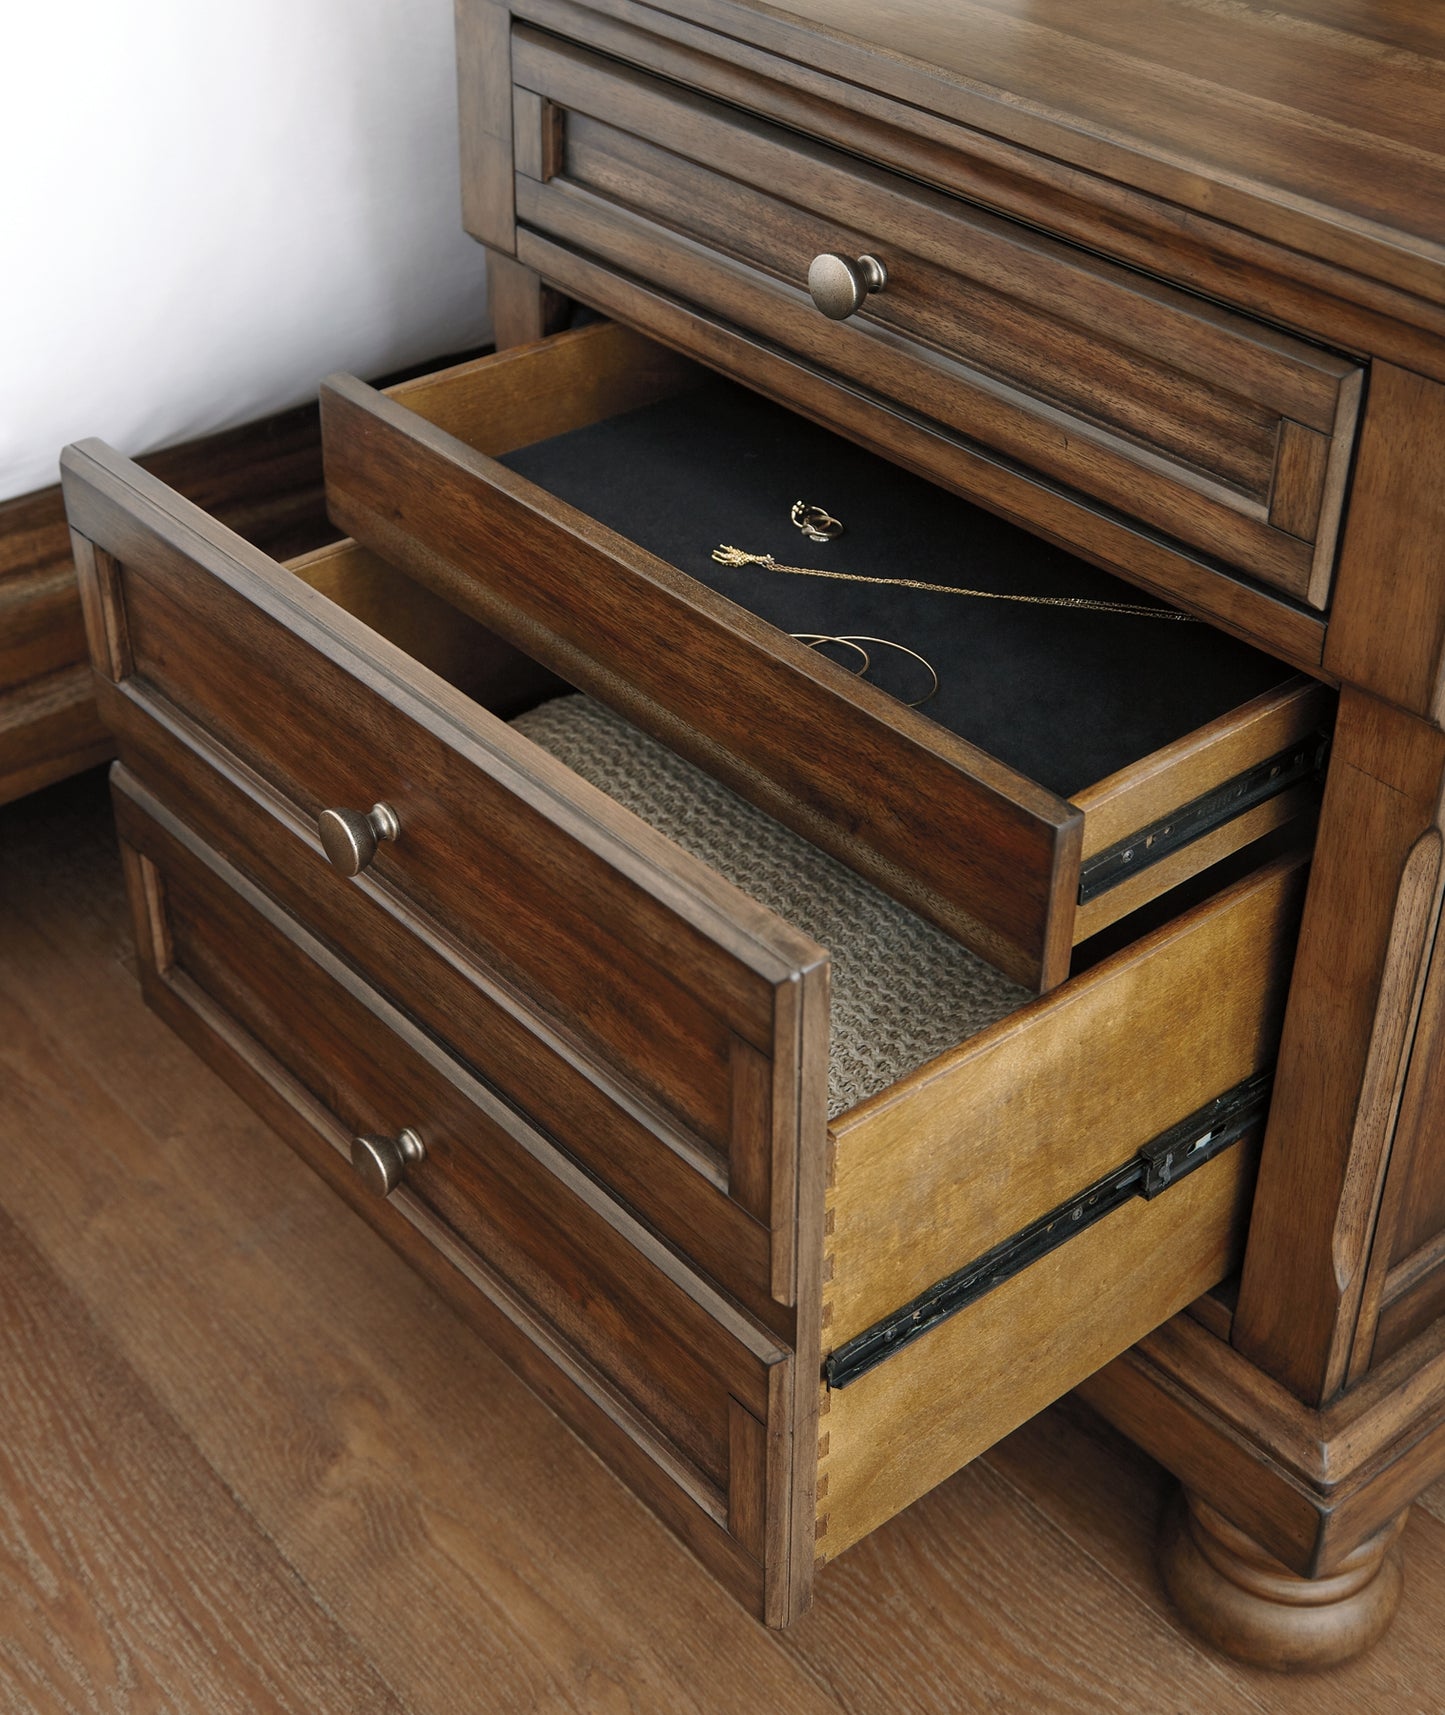 Robbinsdale Two Drawer Night Stand